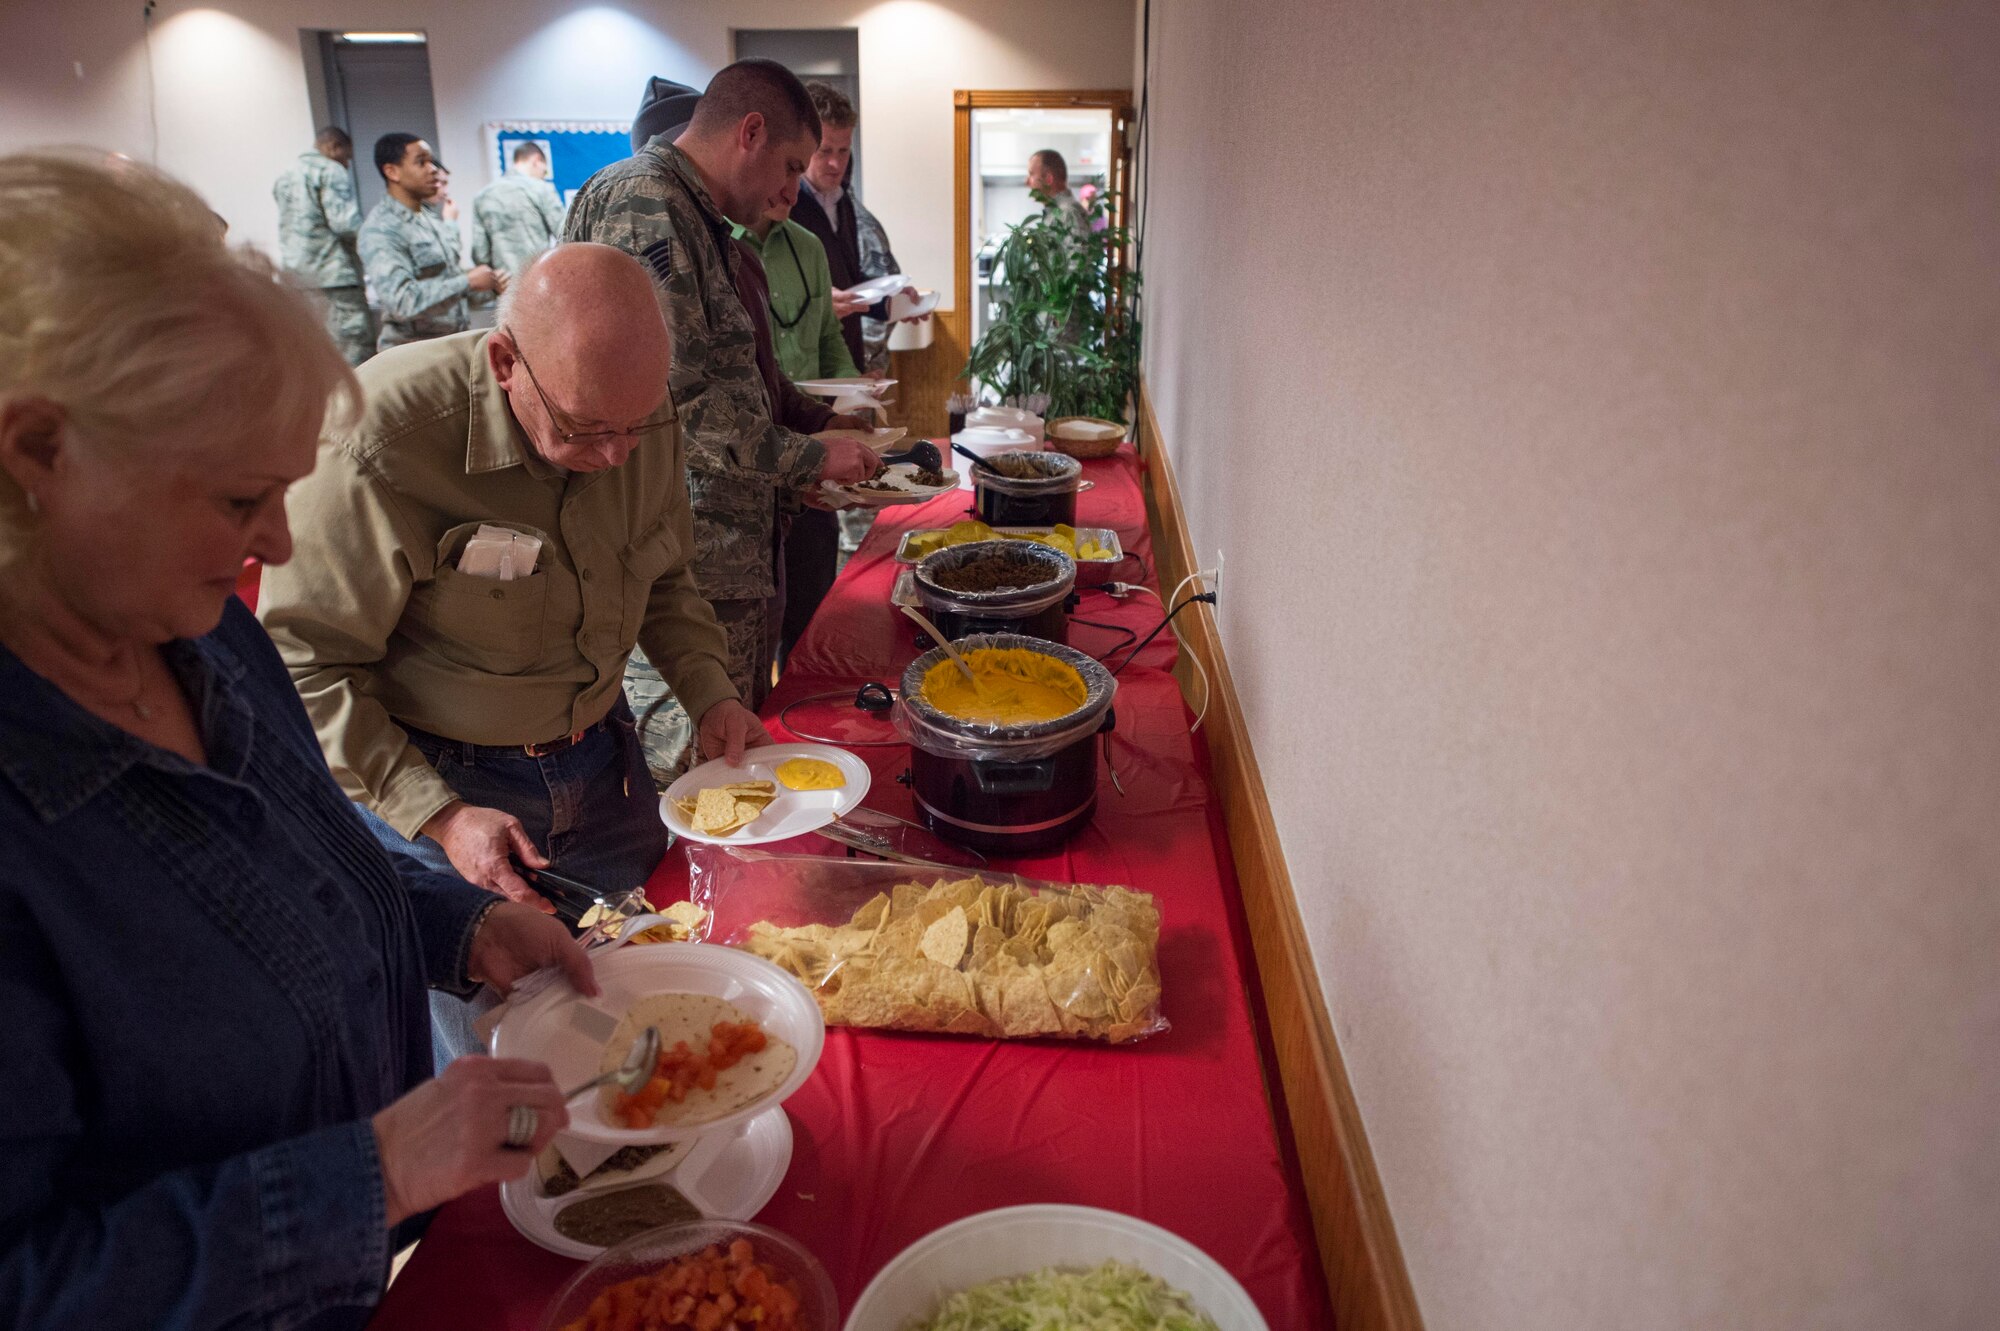 Members of the base community gather food on their plates during the fellowship luncheon in the Chapel Activity Center at F.E. Warren Air Force Base, Wyo., Feb. 2, 2017. The fellowship luncheons give people a chance to sit down, talk to one another and enjoy social bonding while eating lunch. (U.S. Air Force photo by Terry Higgins)